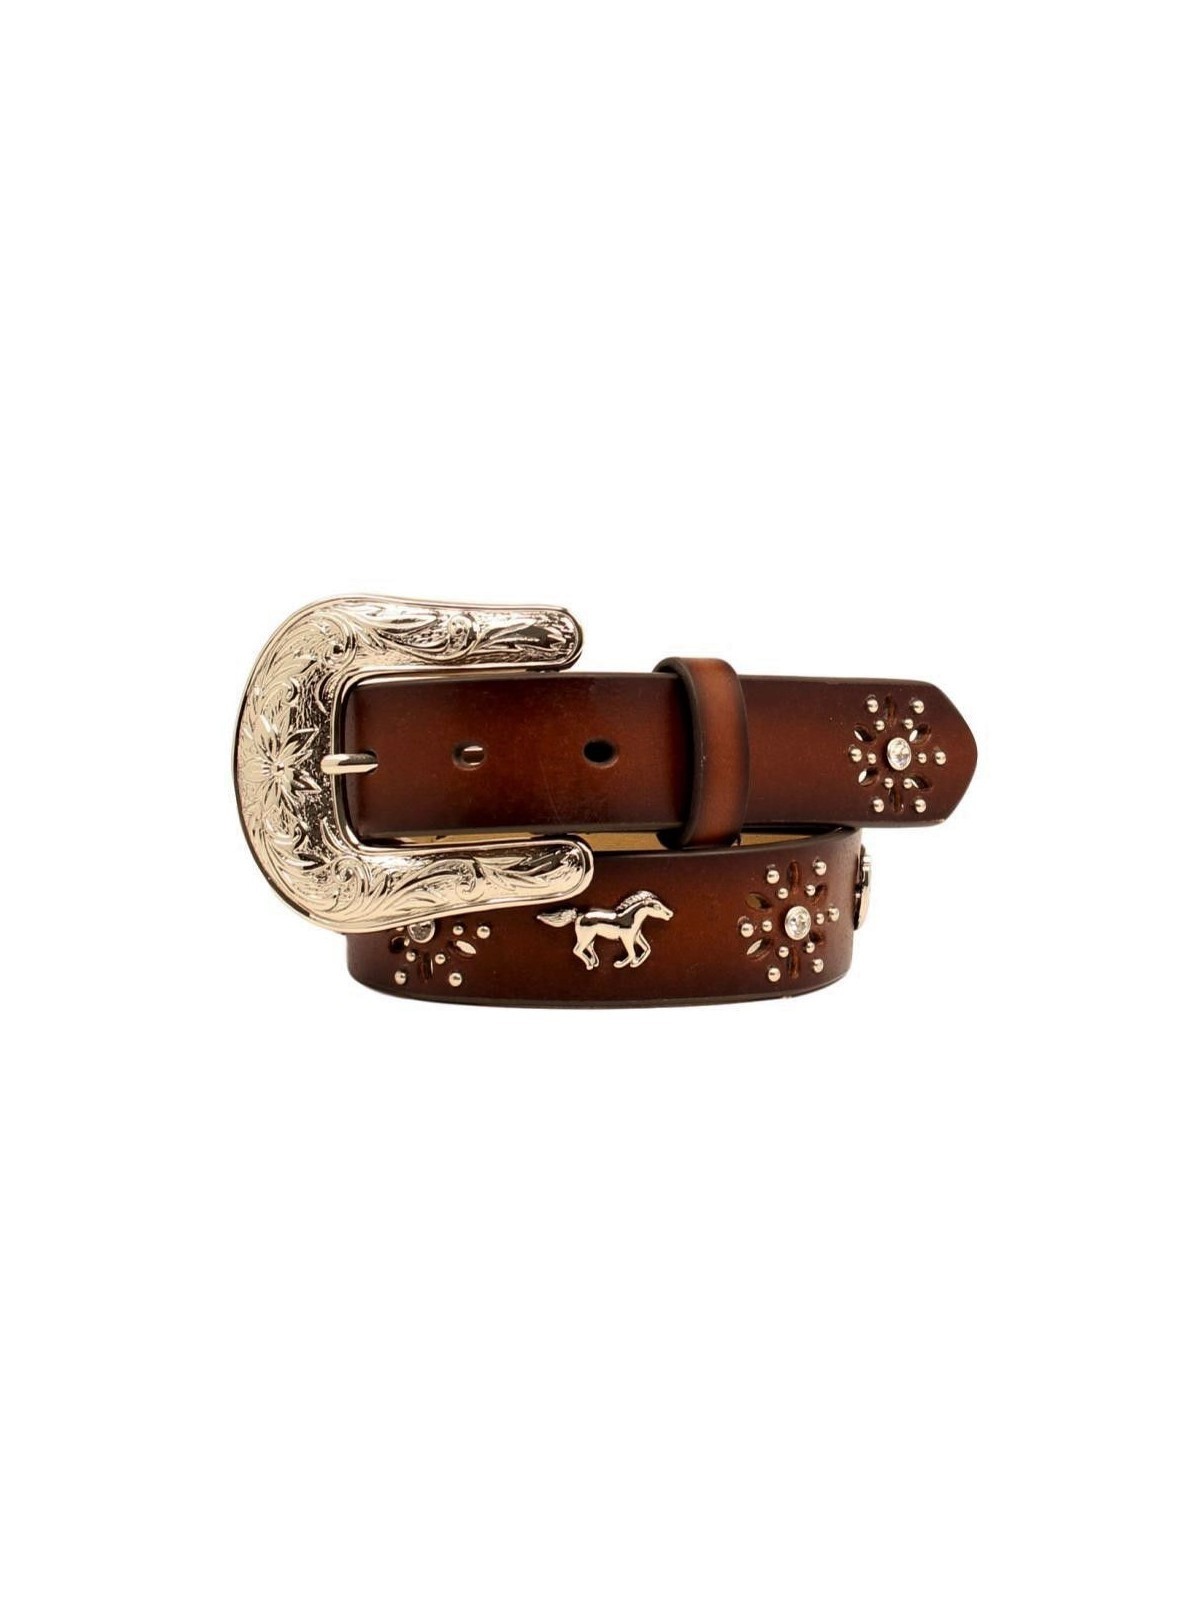 Ariat Girls Brown Leather Horse Concho Belt